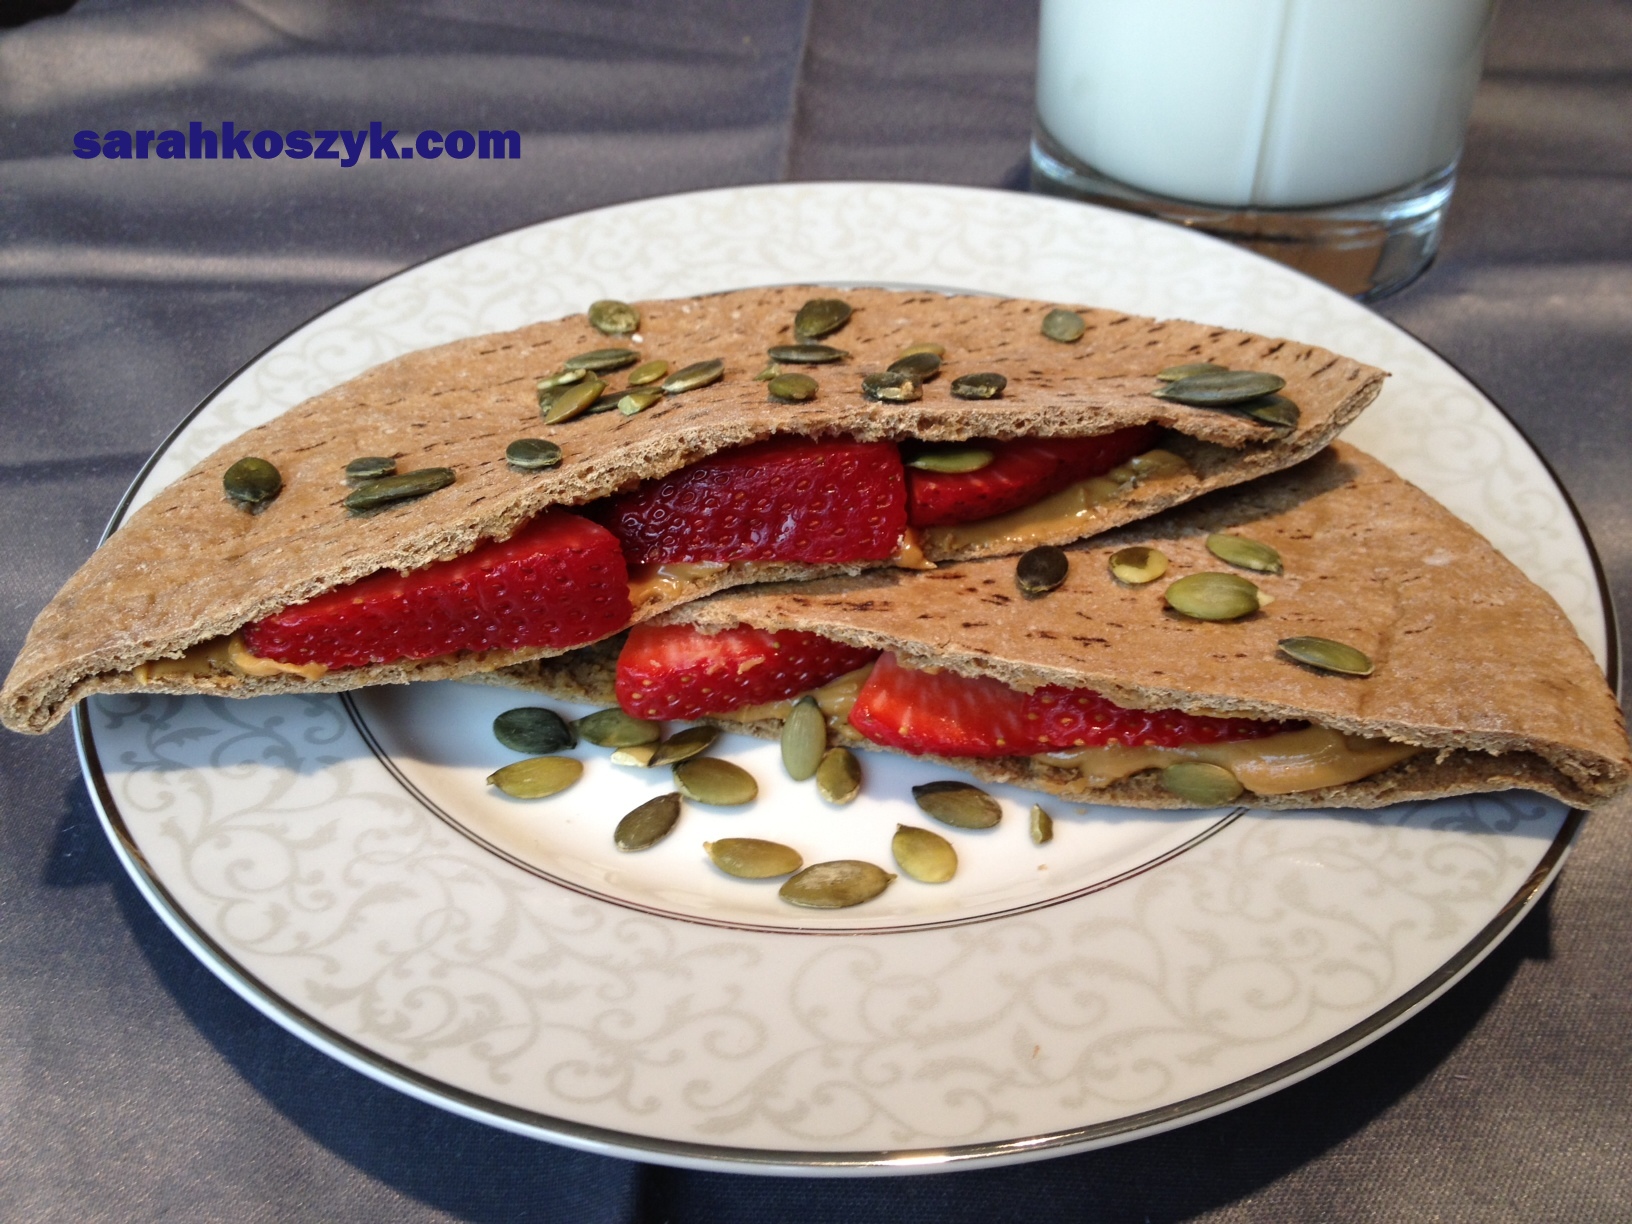 Snack On The Pita: After School Snack Ideas